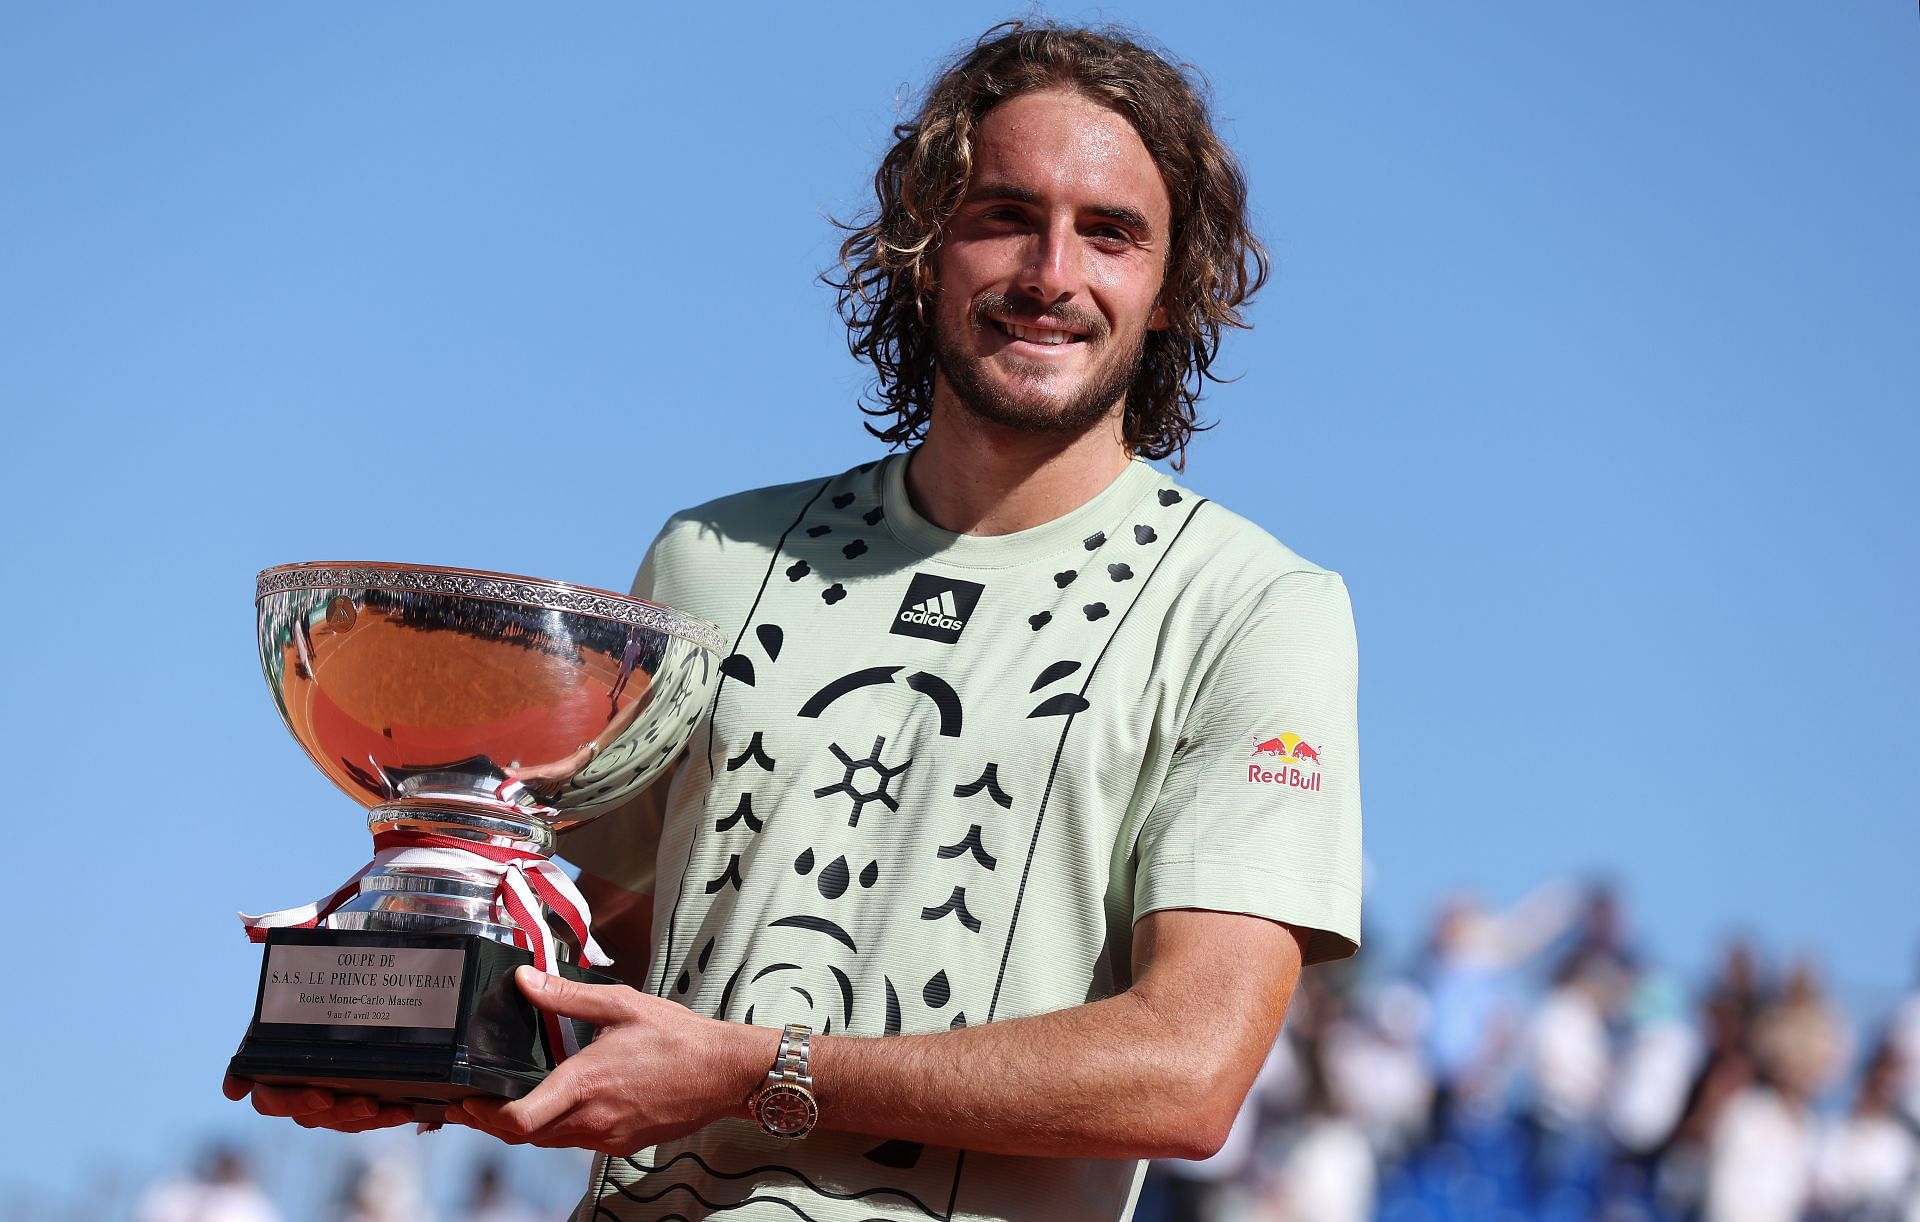 Stefanos Tsitsipas became the first non-Big 4 player to defend a Masters 1000 title since 2003